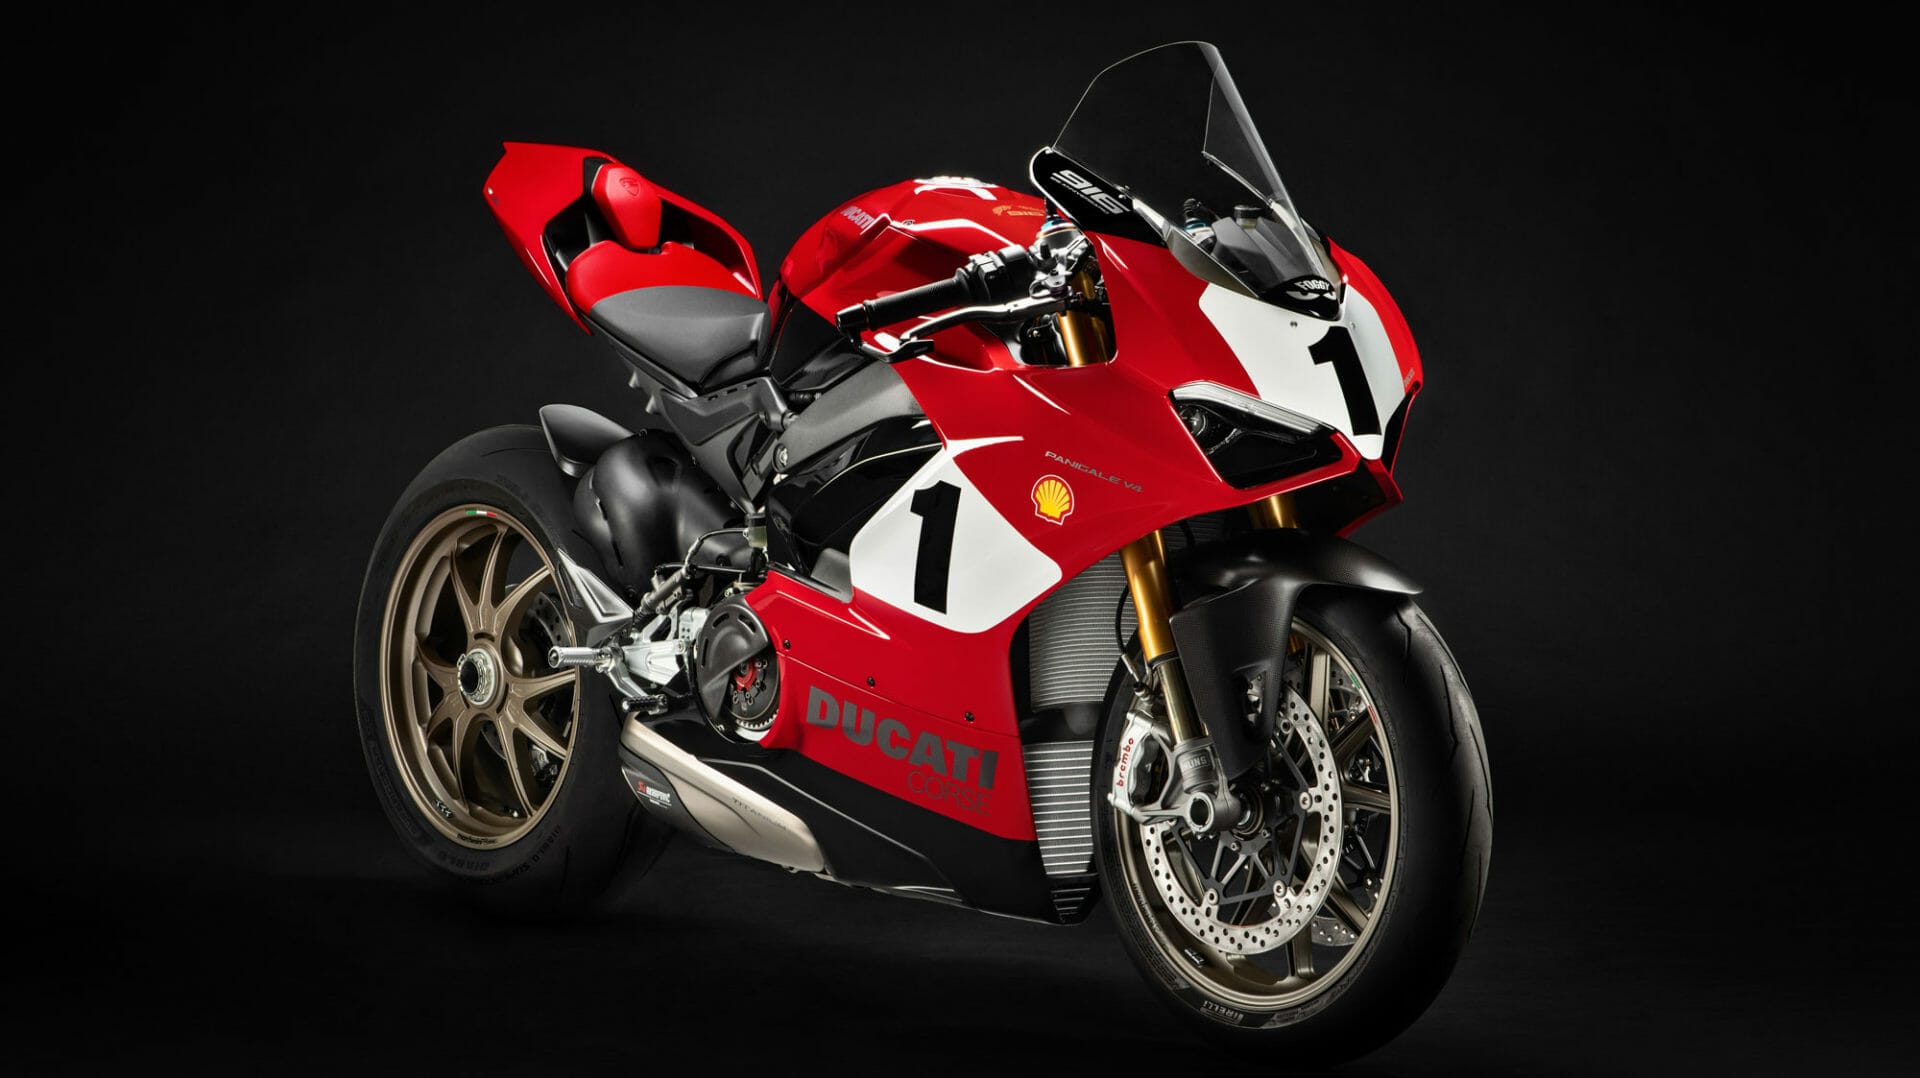 Auction: Panigale V4 25 ° Anniversario 916 in favor of the Carlin Dunne Foundation